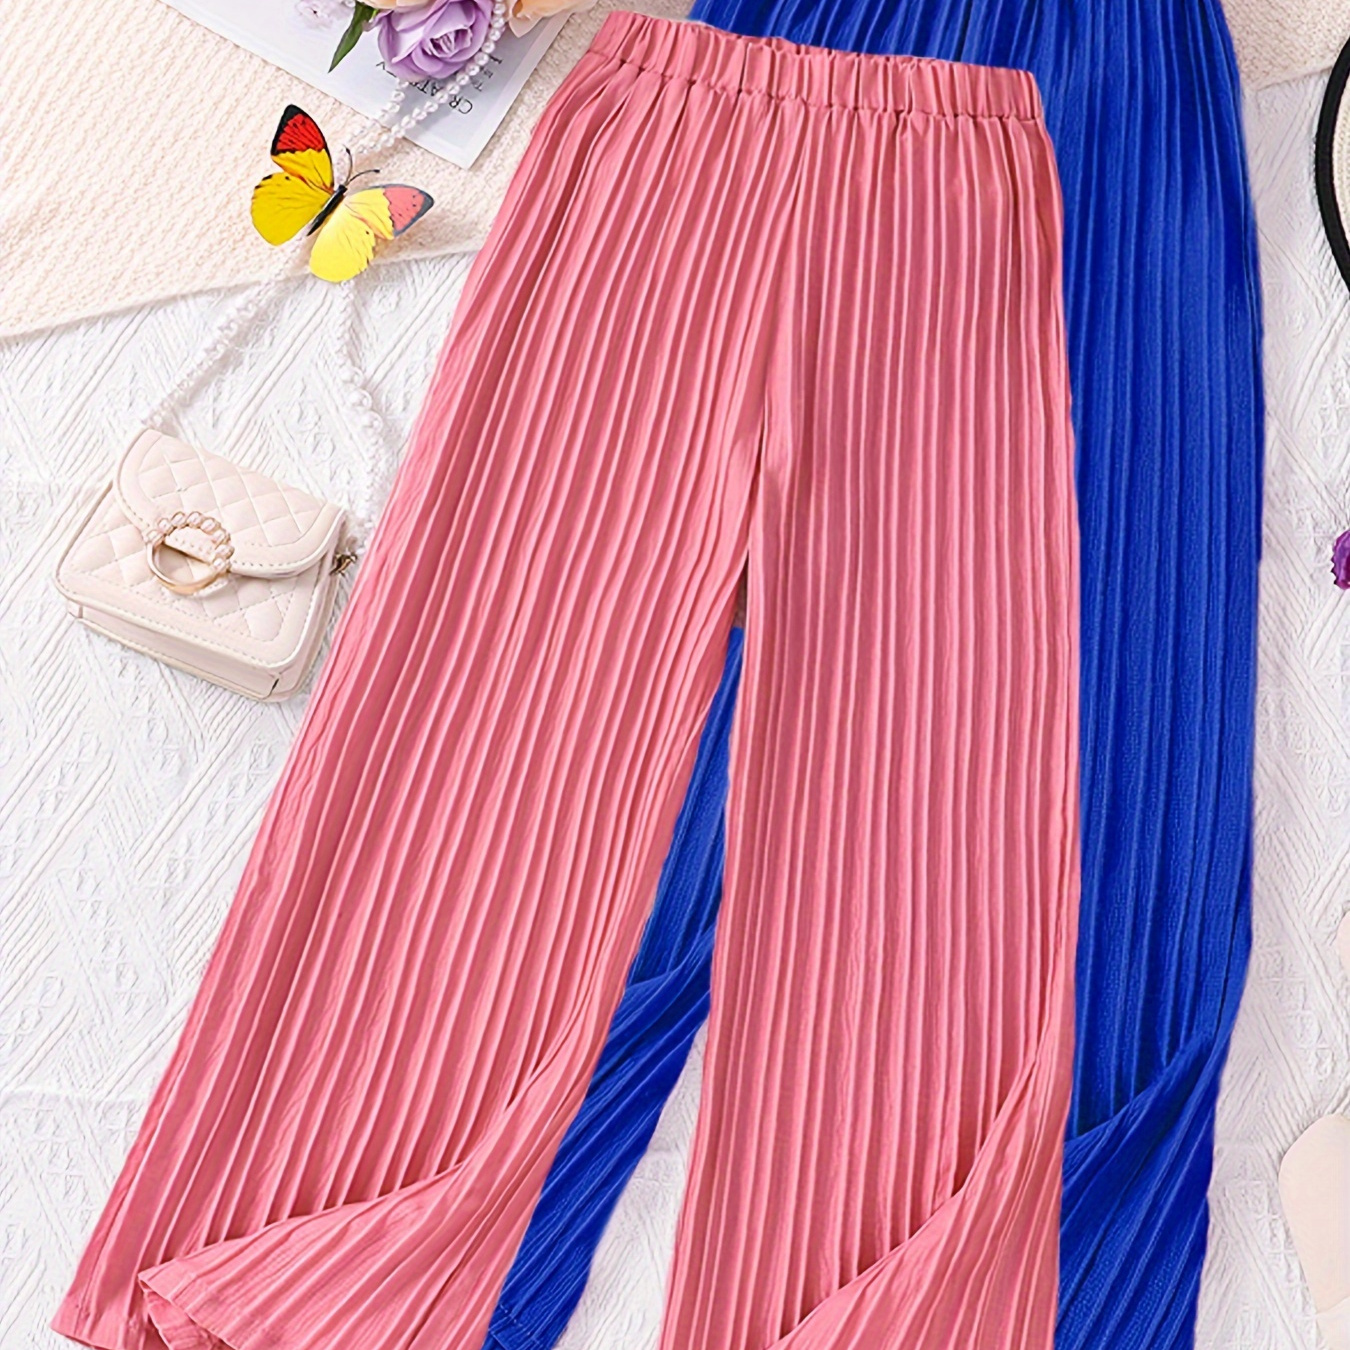 

Tween Girls 2pcs/set Casual & Loose & Comfy Solid Colored Textured Wide Leg Pants For Spring & Summer, Girls Clothing